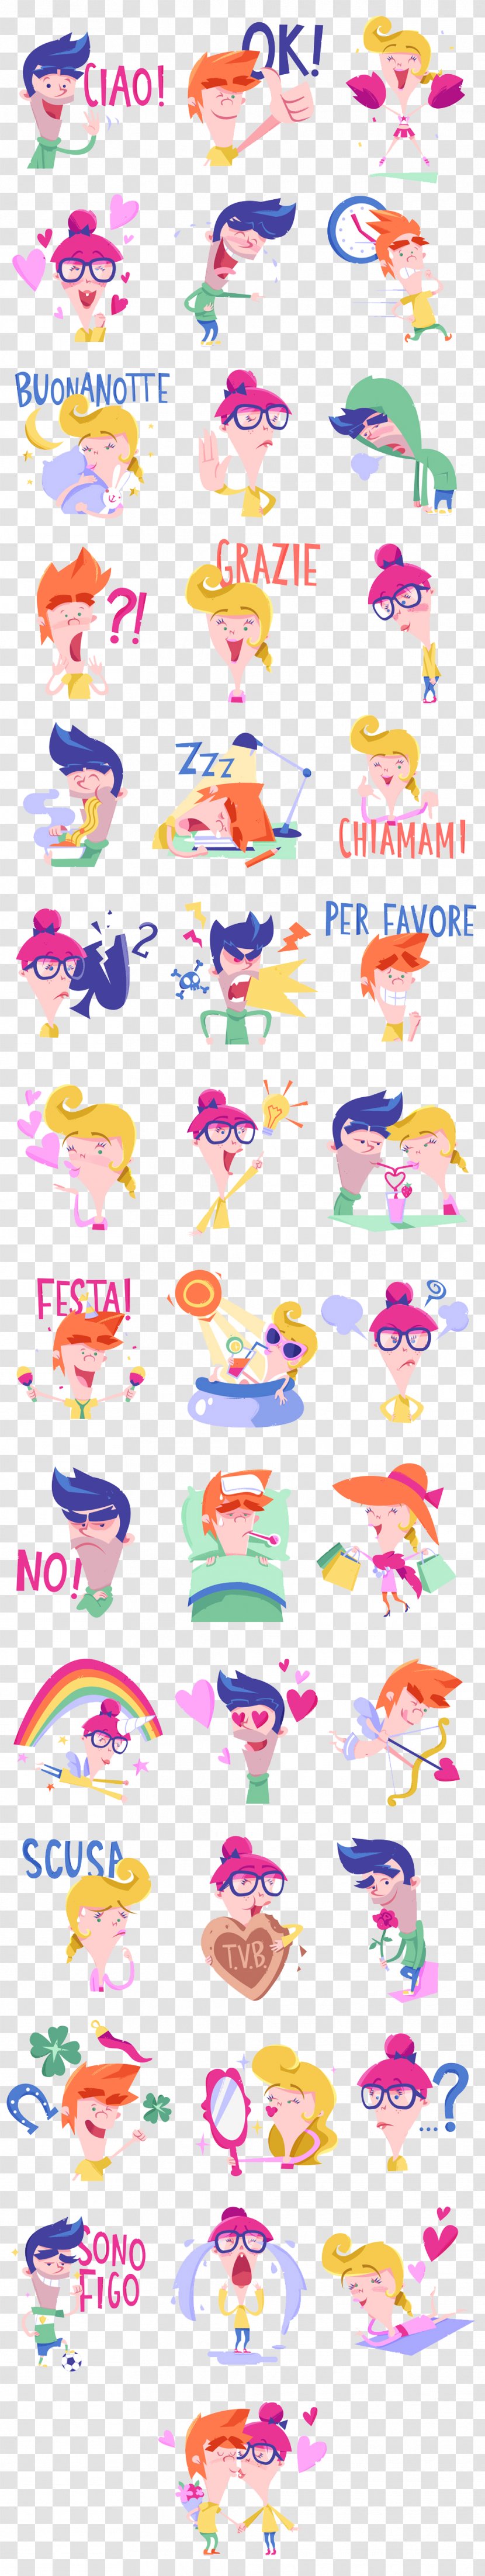 Cartoon Drawing Behance - Pink - Men And Women Exaggerated Facial Expressions Collection Transparent PNG